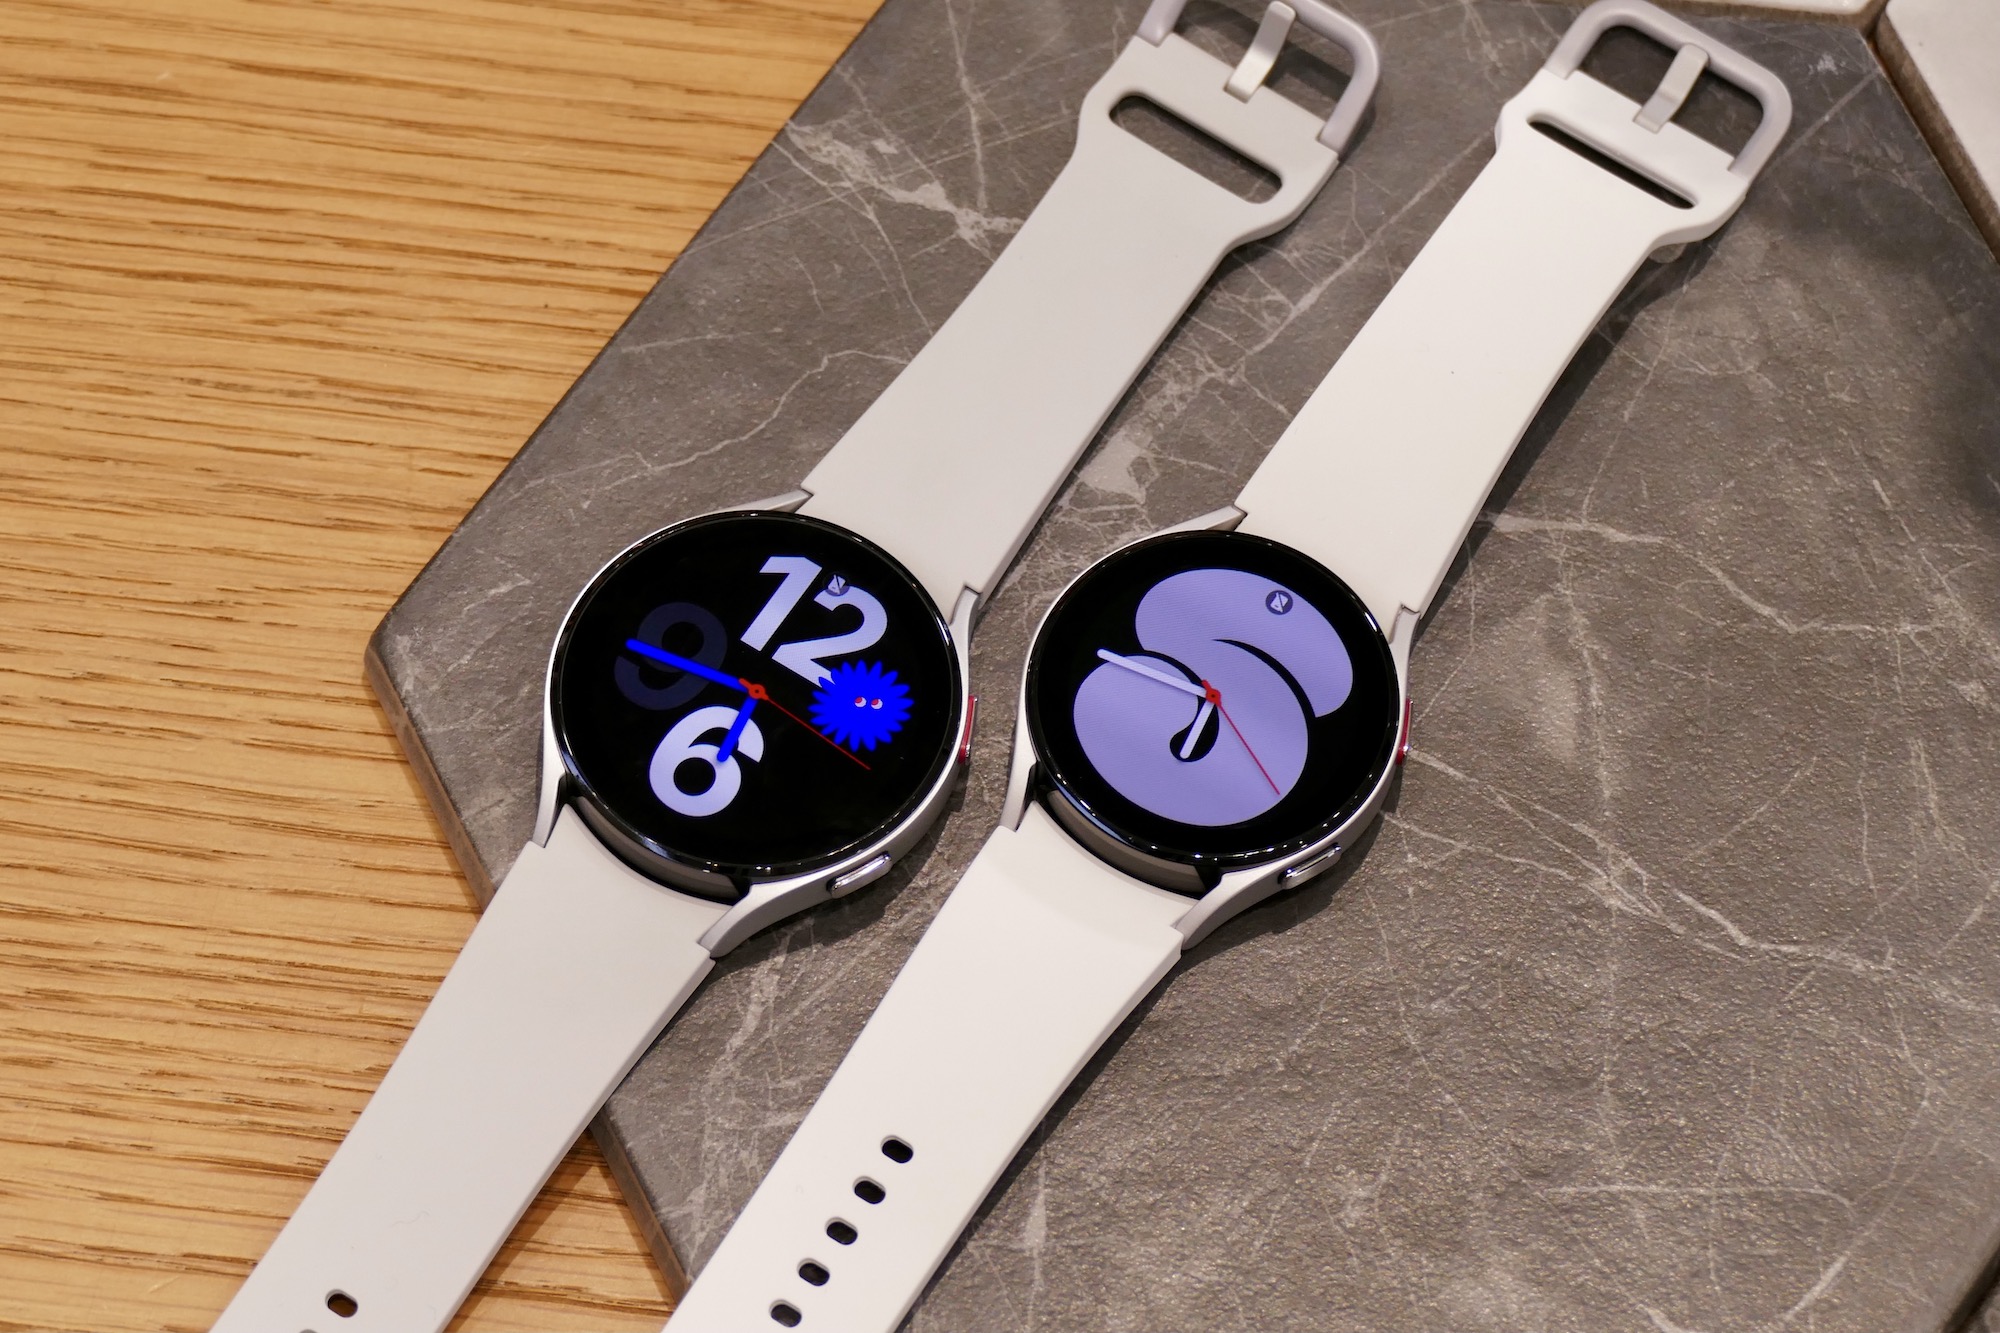 The Samsung Galaxy Watch 4 in white, in two sizes.